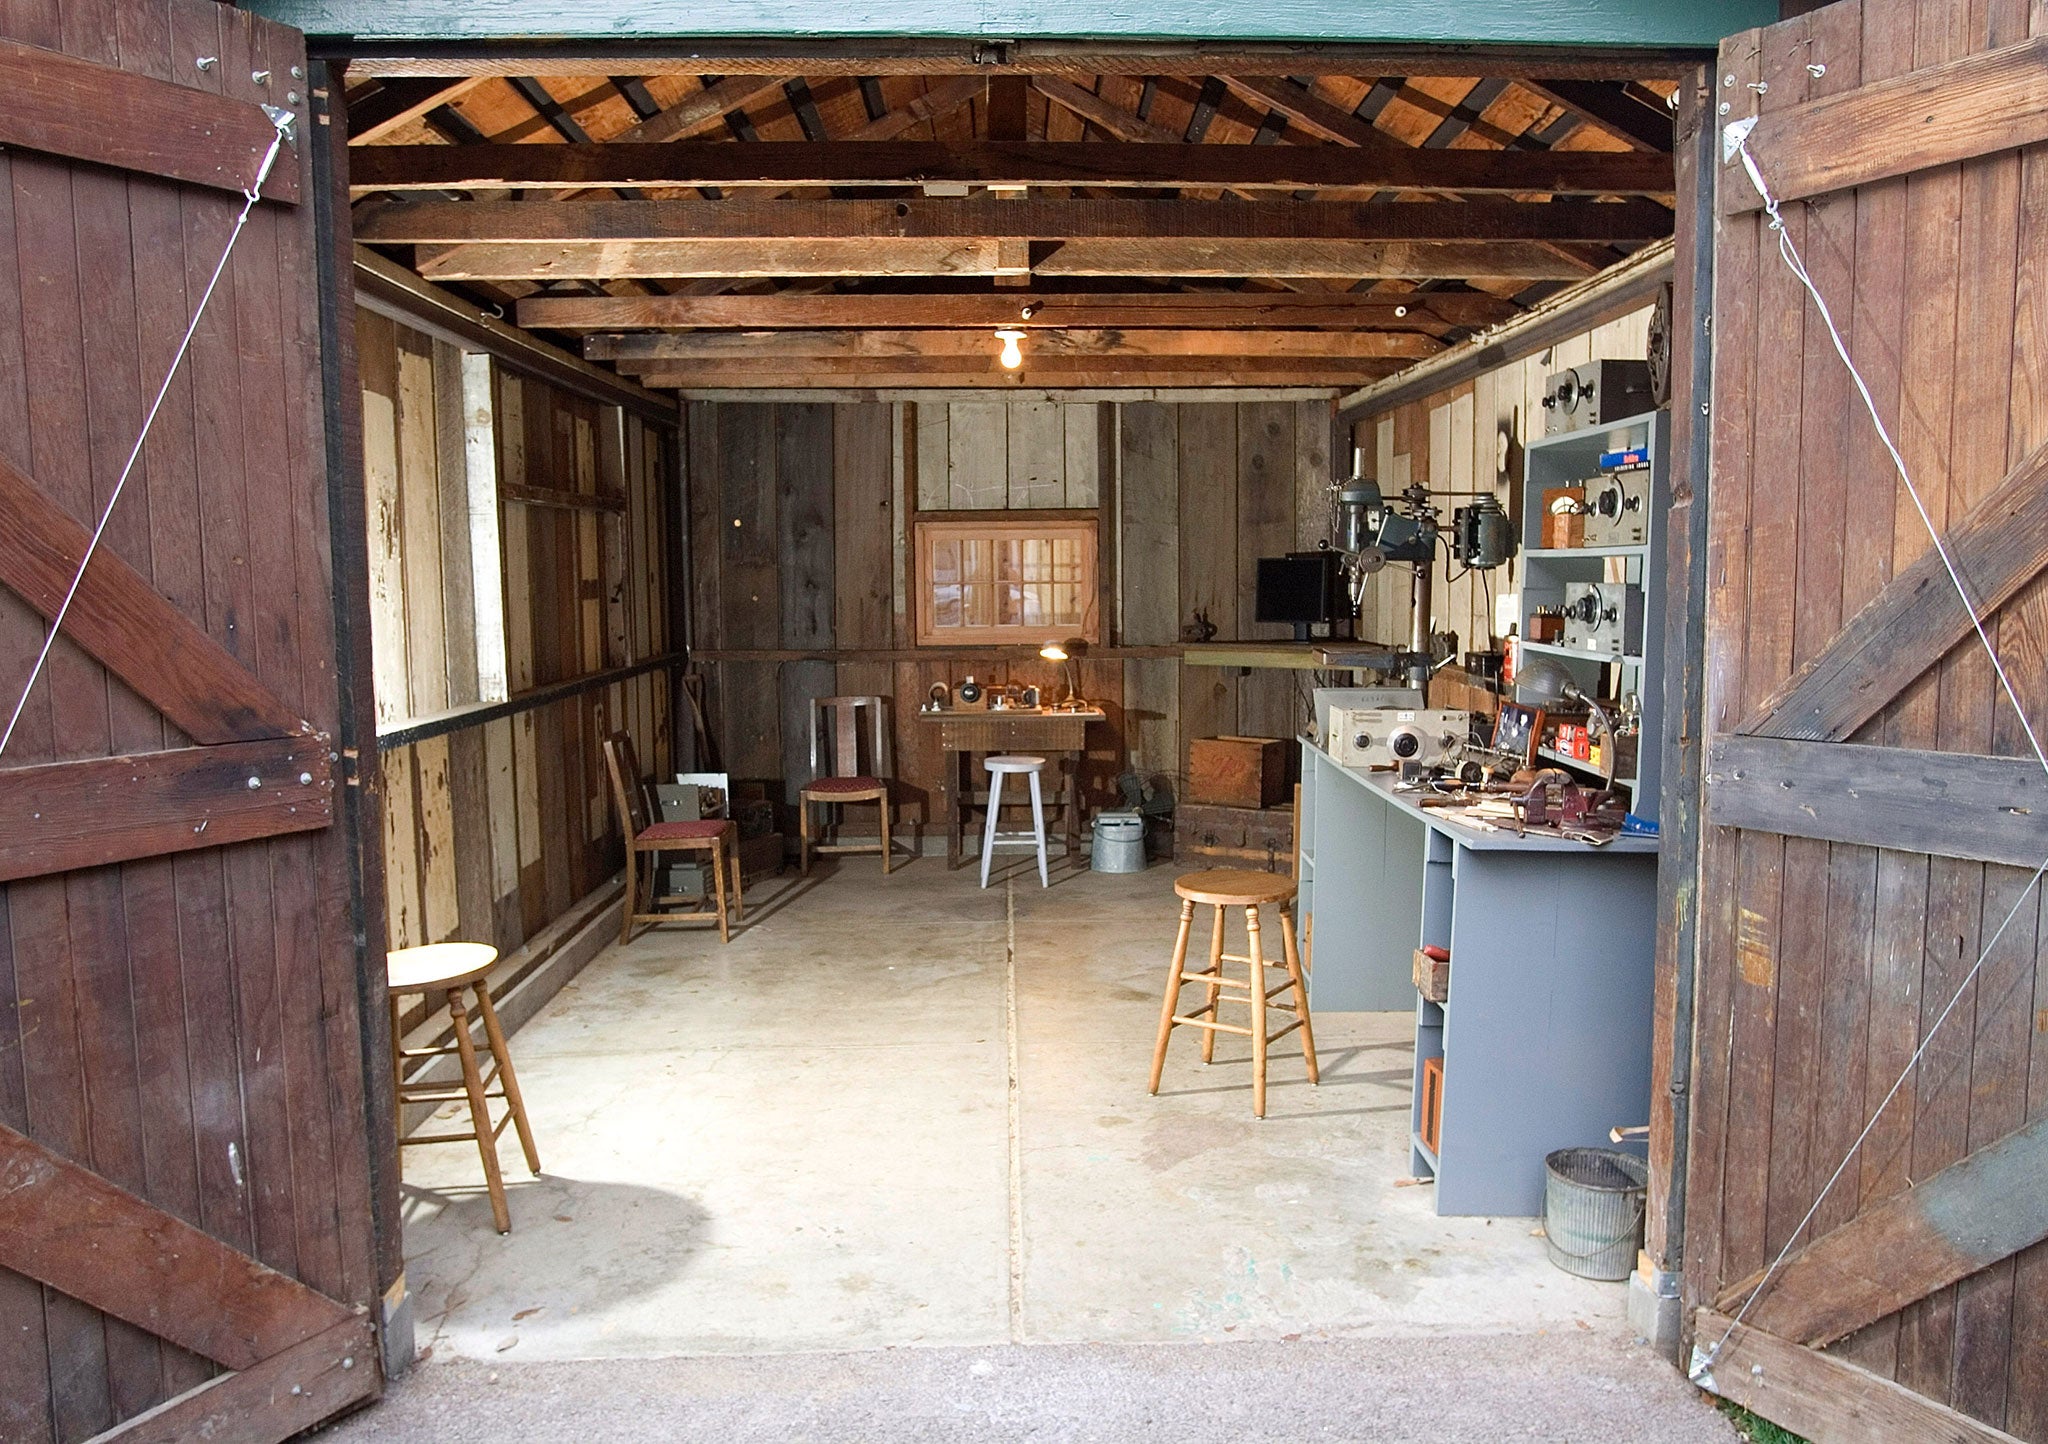 The tiny Palo Alto shed where Hewlett-Packard, and Silicon Valley, started